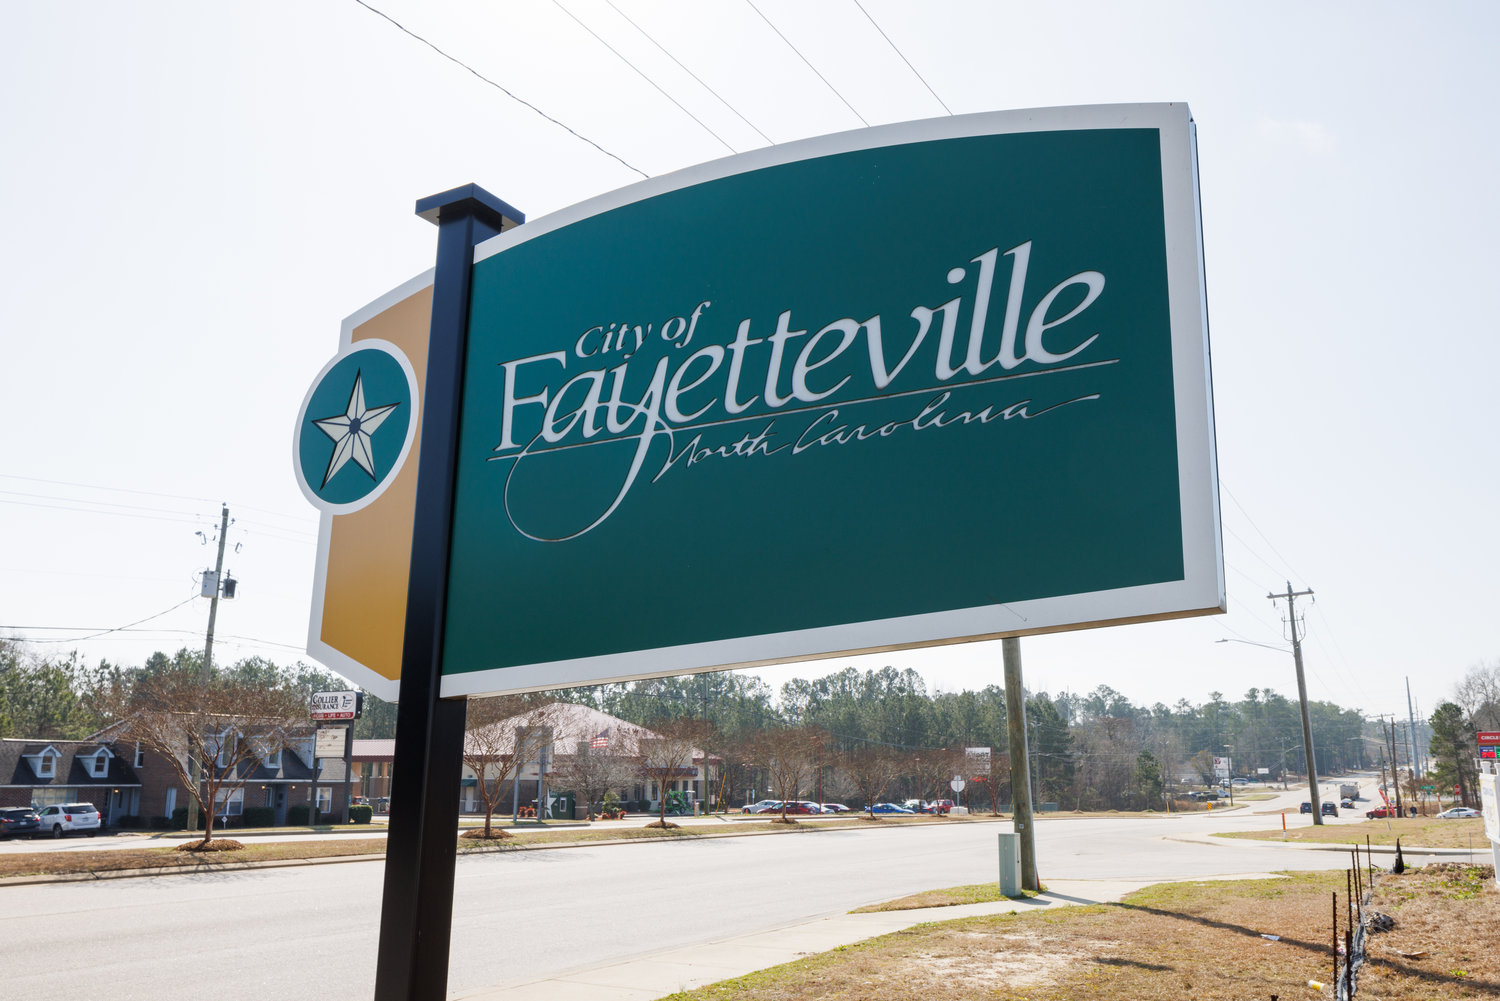 Fayetteville Mayor Mitch Colvin met with five members of the City Council on Monday to discuss committee assignments and their role as chairs of those committees.